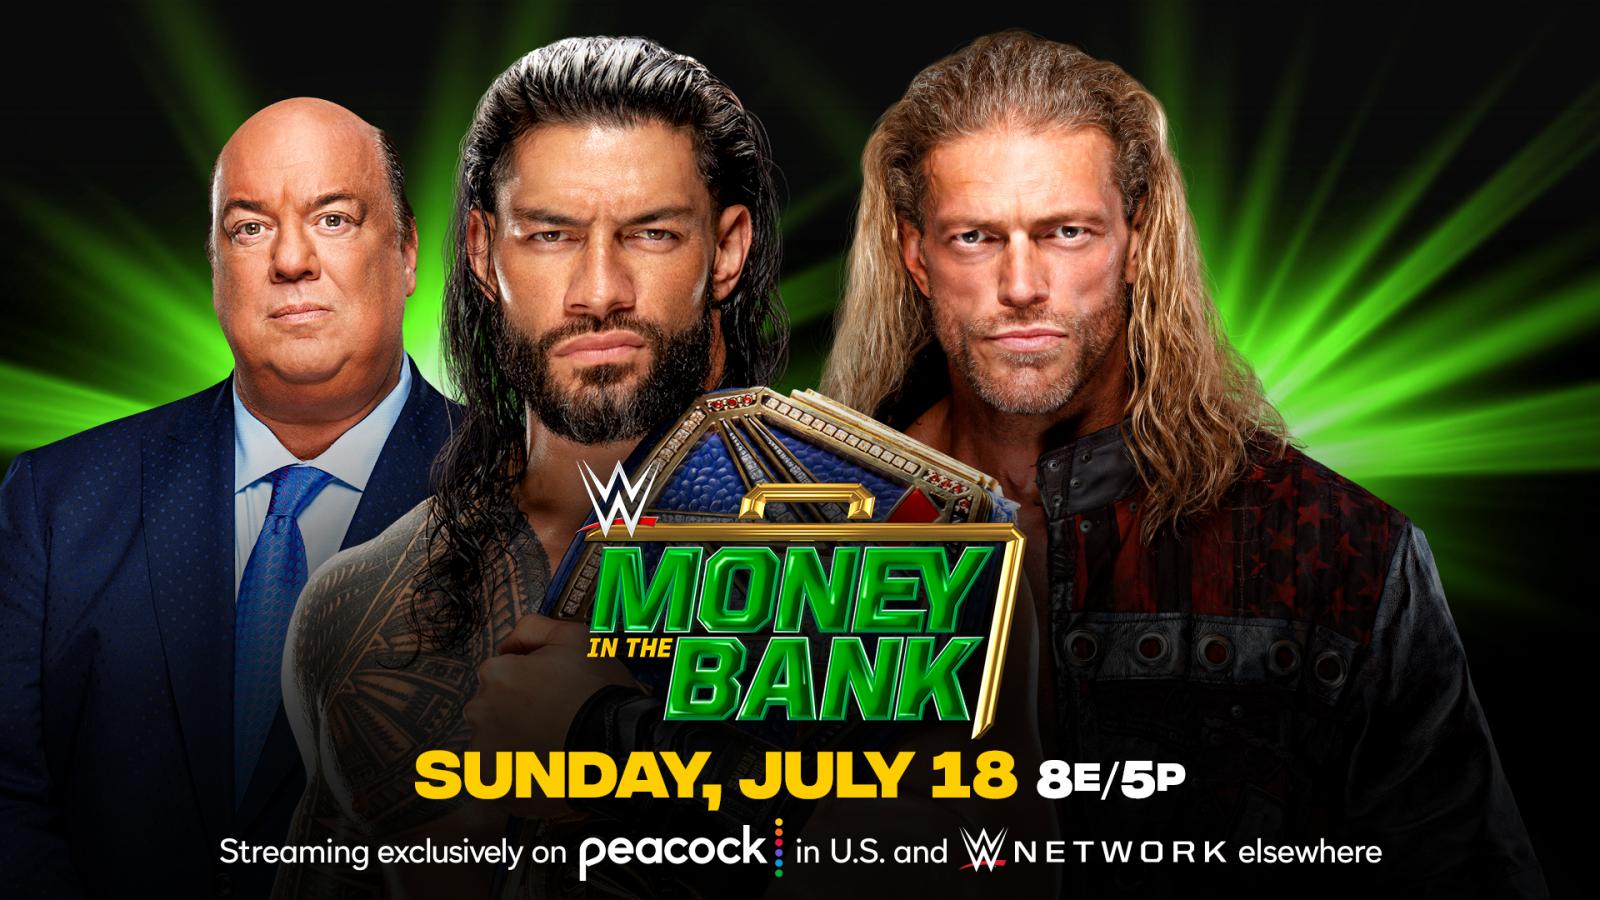 Roman Reigns vs. Edge WWE Universal Title Match Announced for Money in the Bank 2021